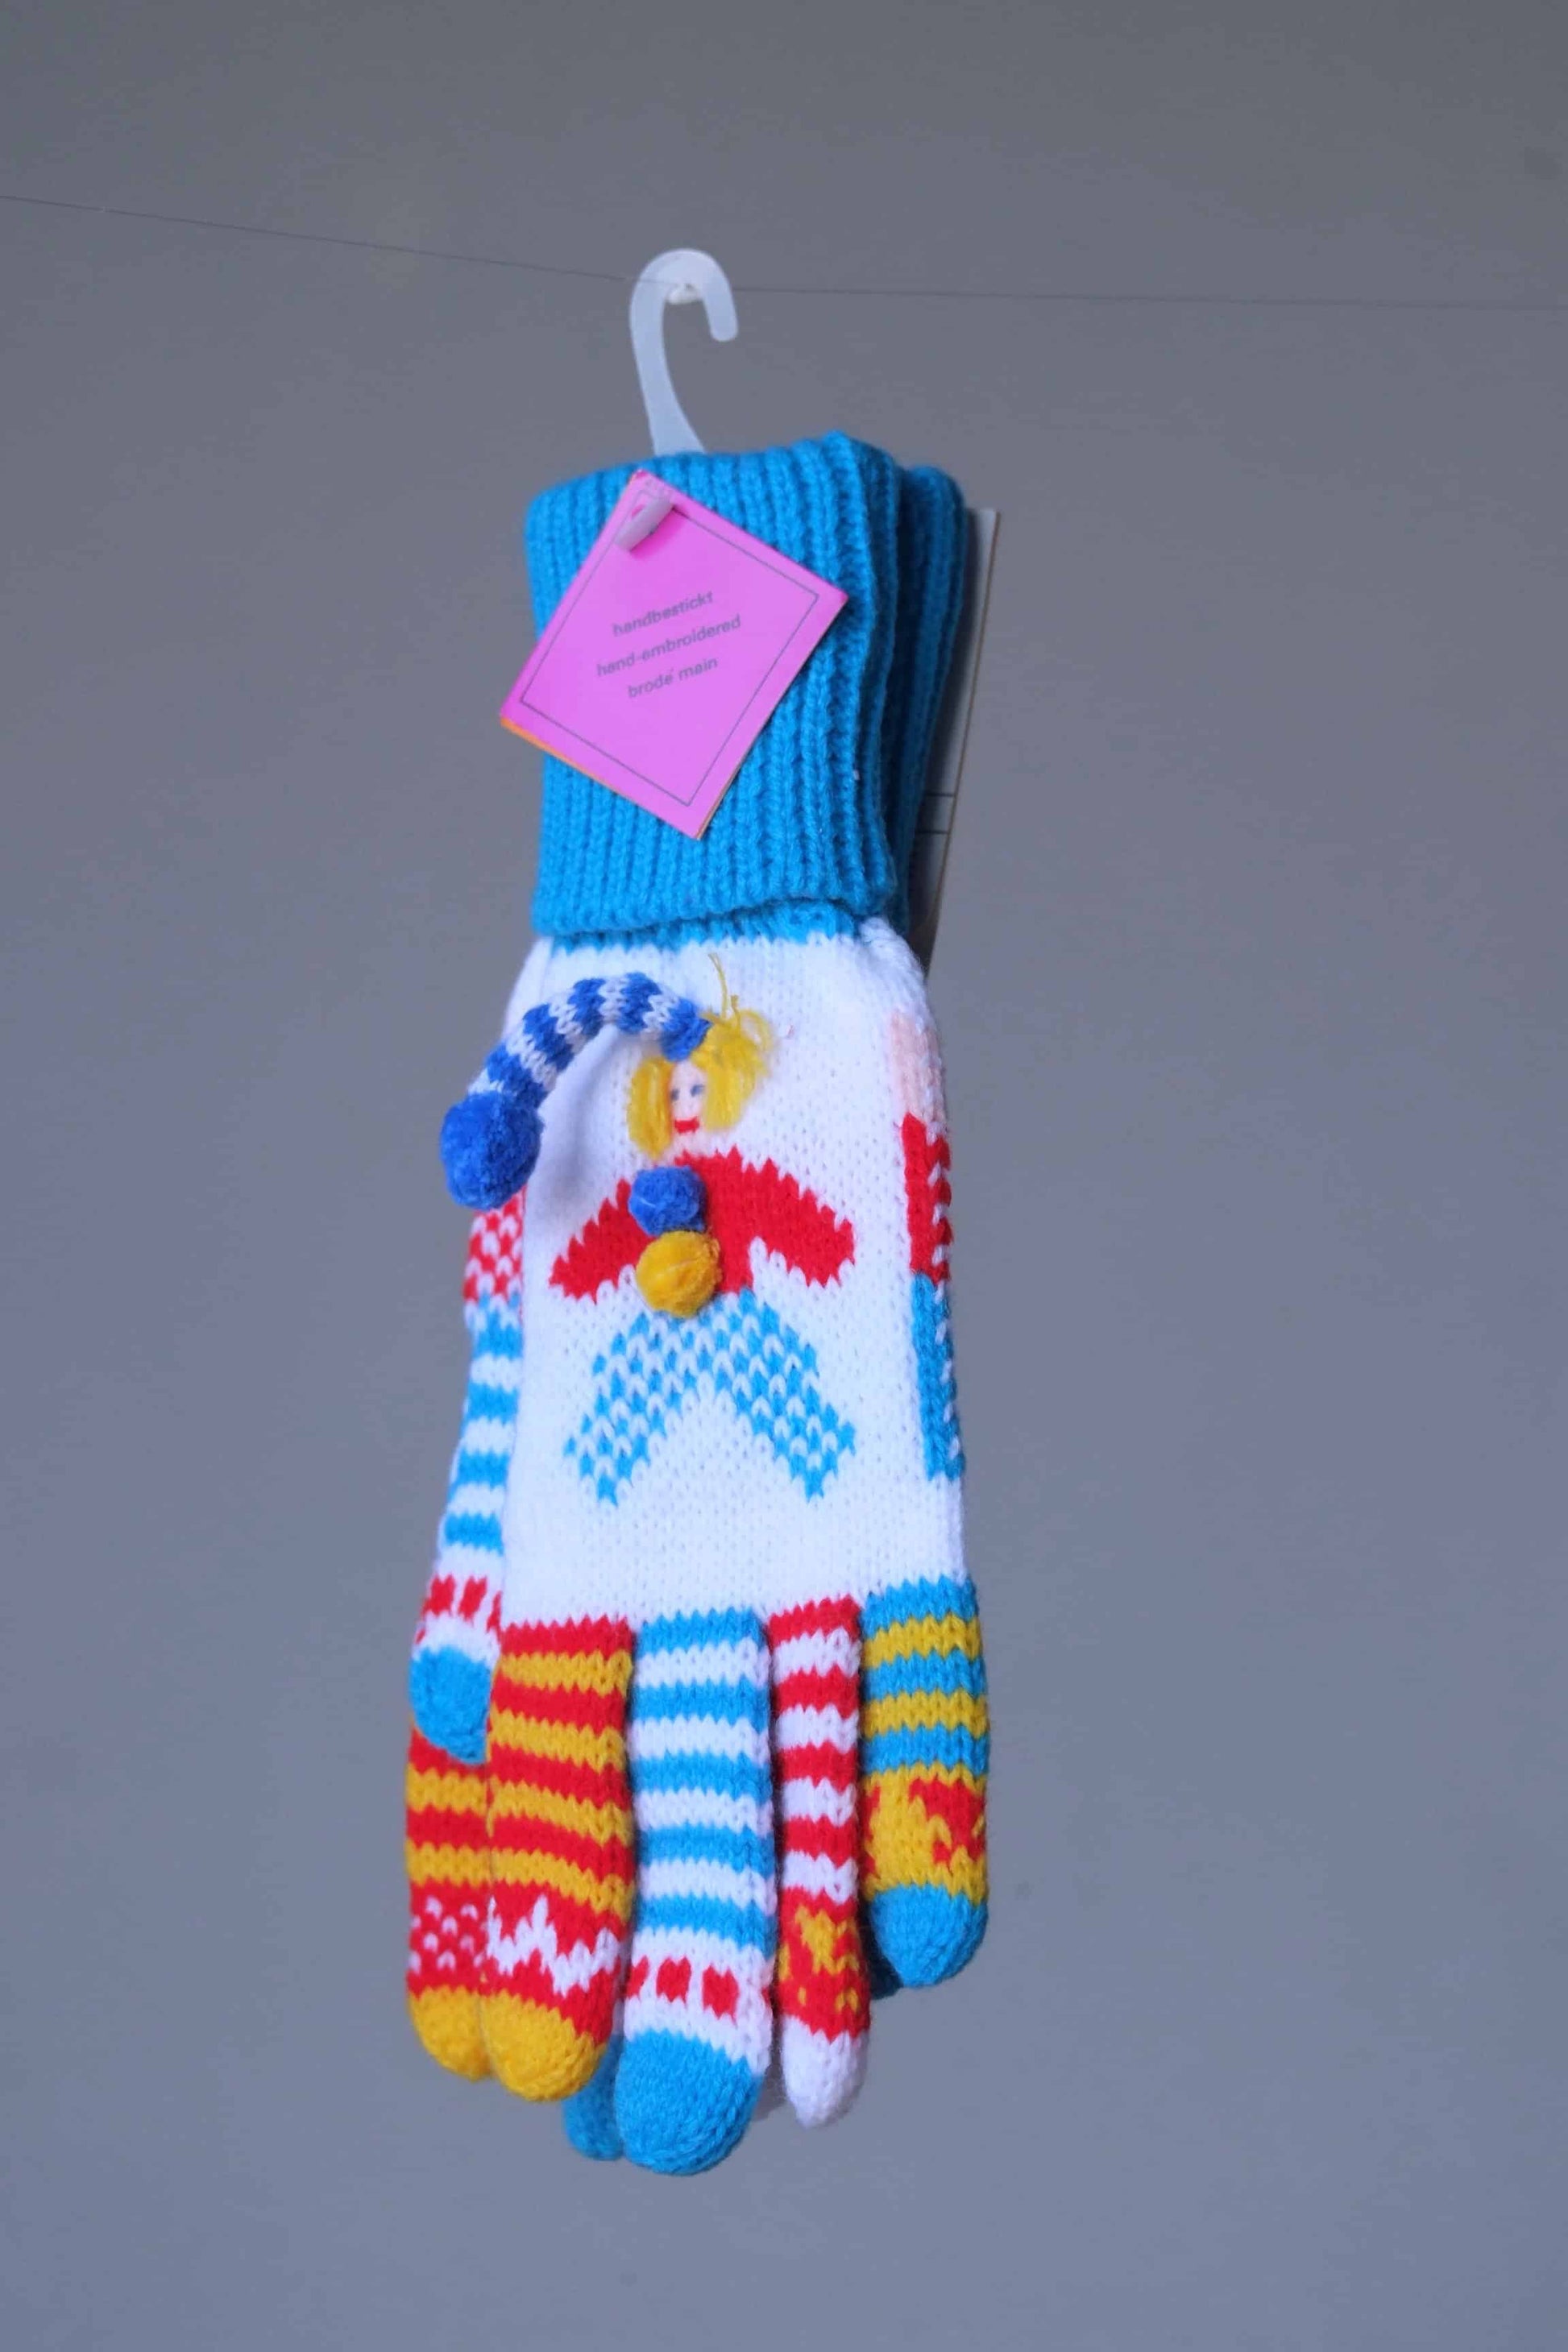 ERGEE Kids Wool Gloves in a turquoise and white clown design